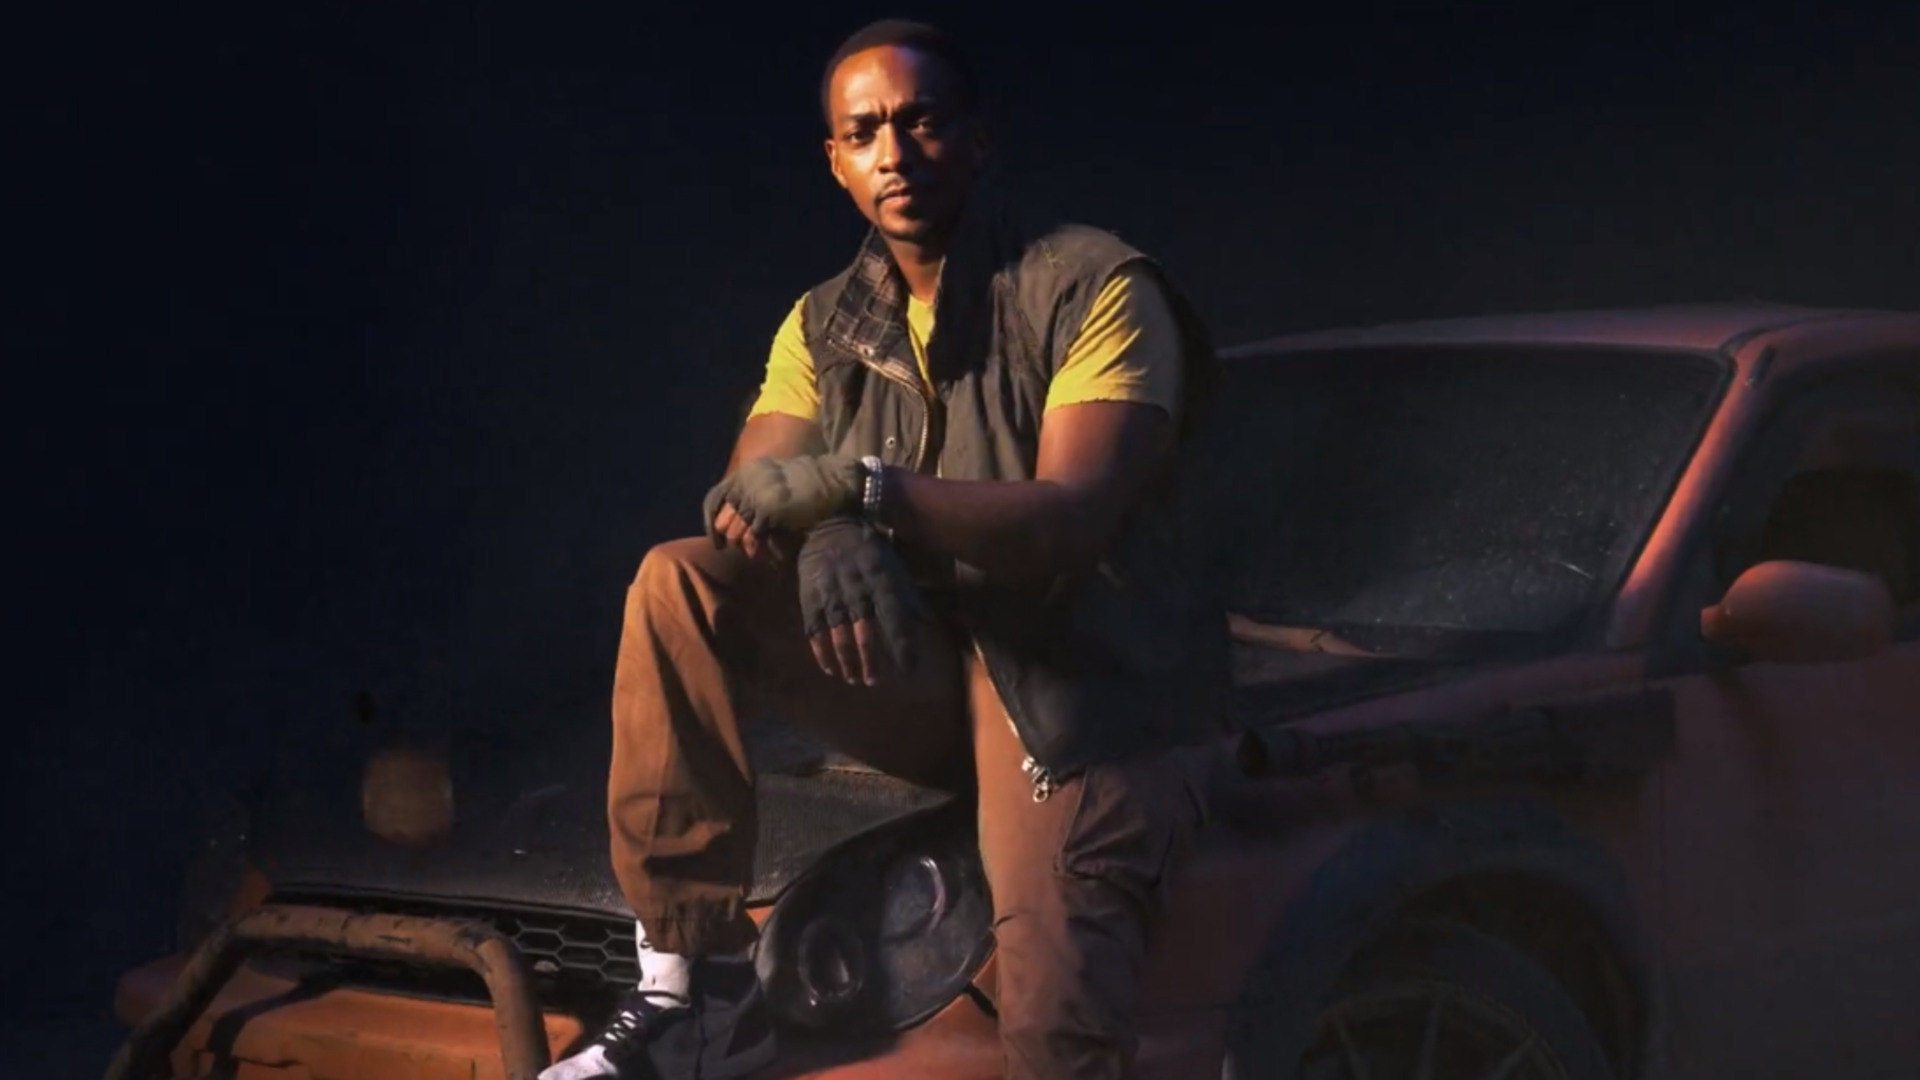 Twisted Metal: Who is Anthony Mackie's Character John Doe?